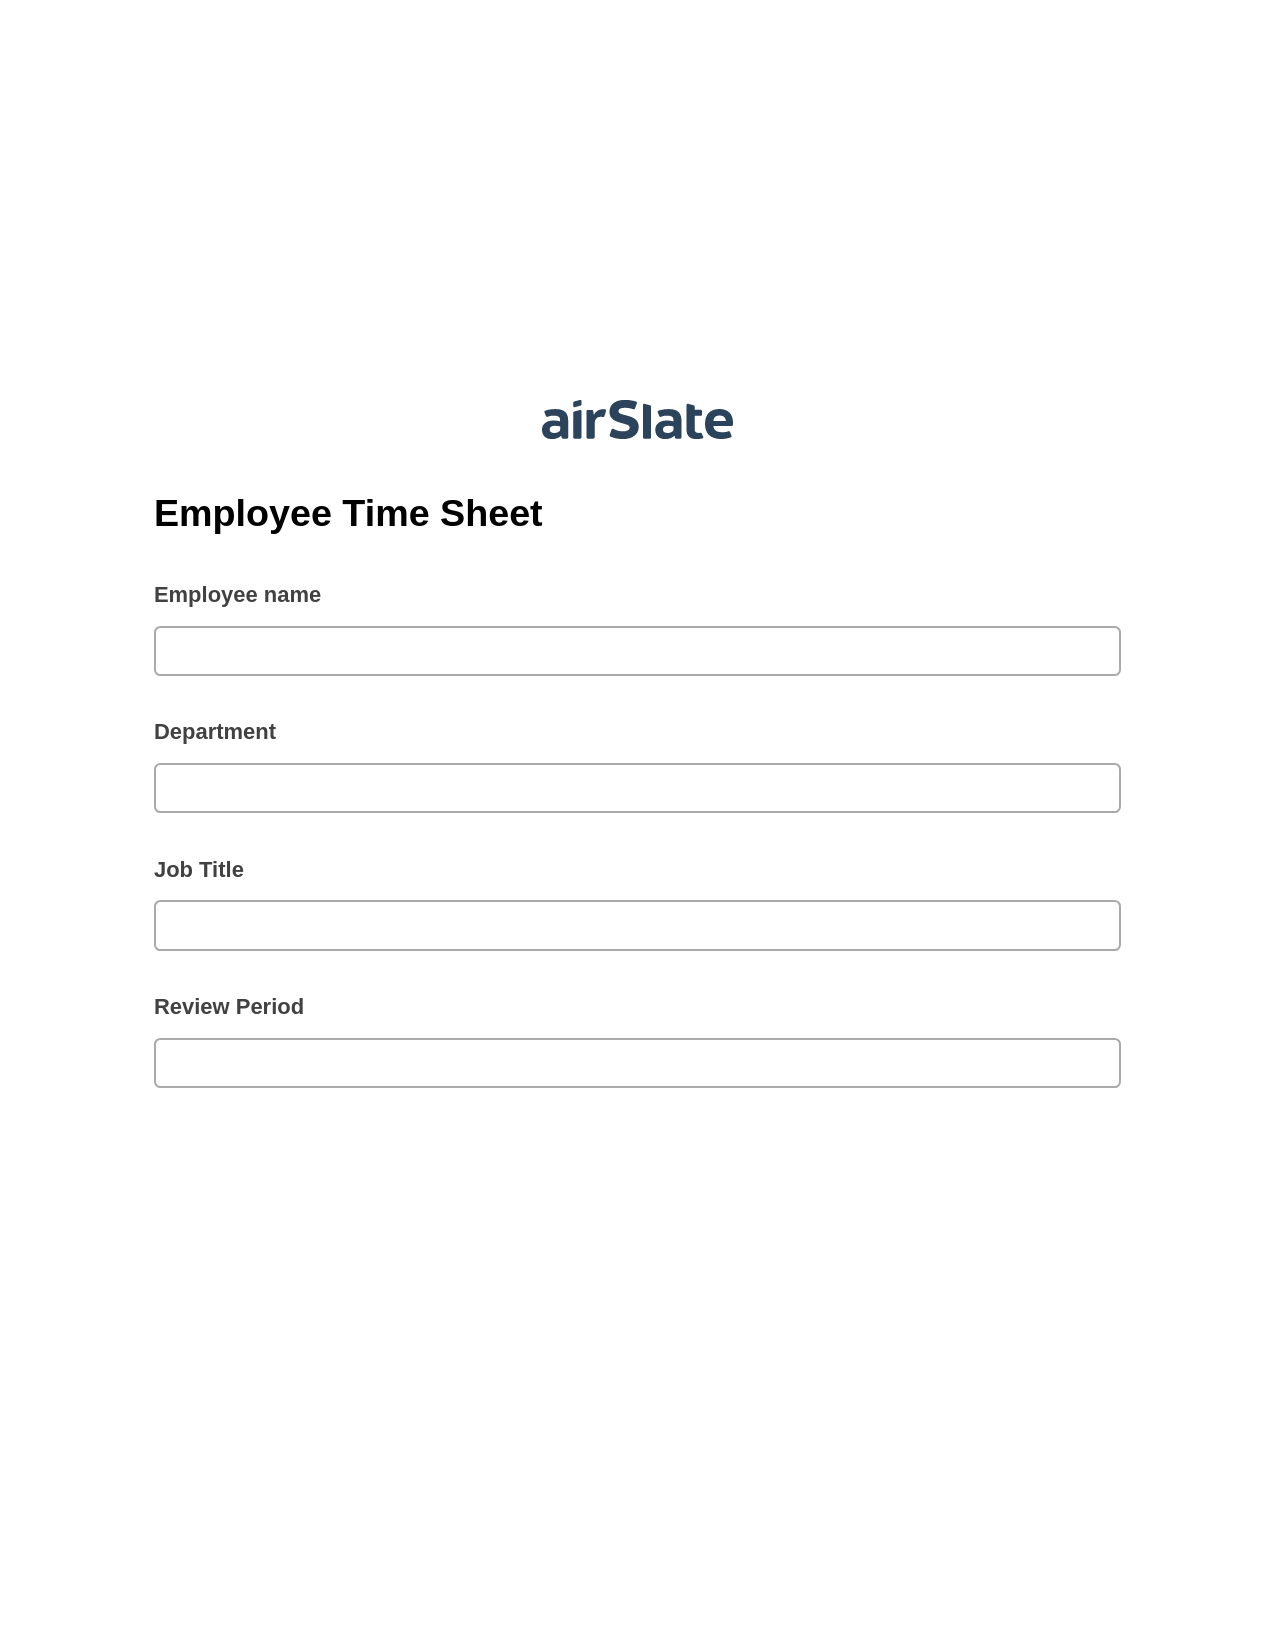 Employee Time Sheet Pre-fill from CSV File Bot, Create slate addon, Archive to Dropbox Bot